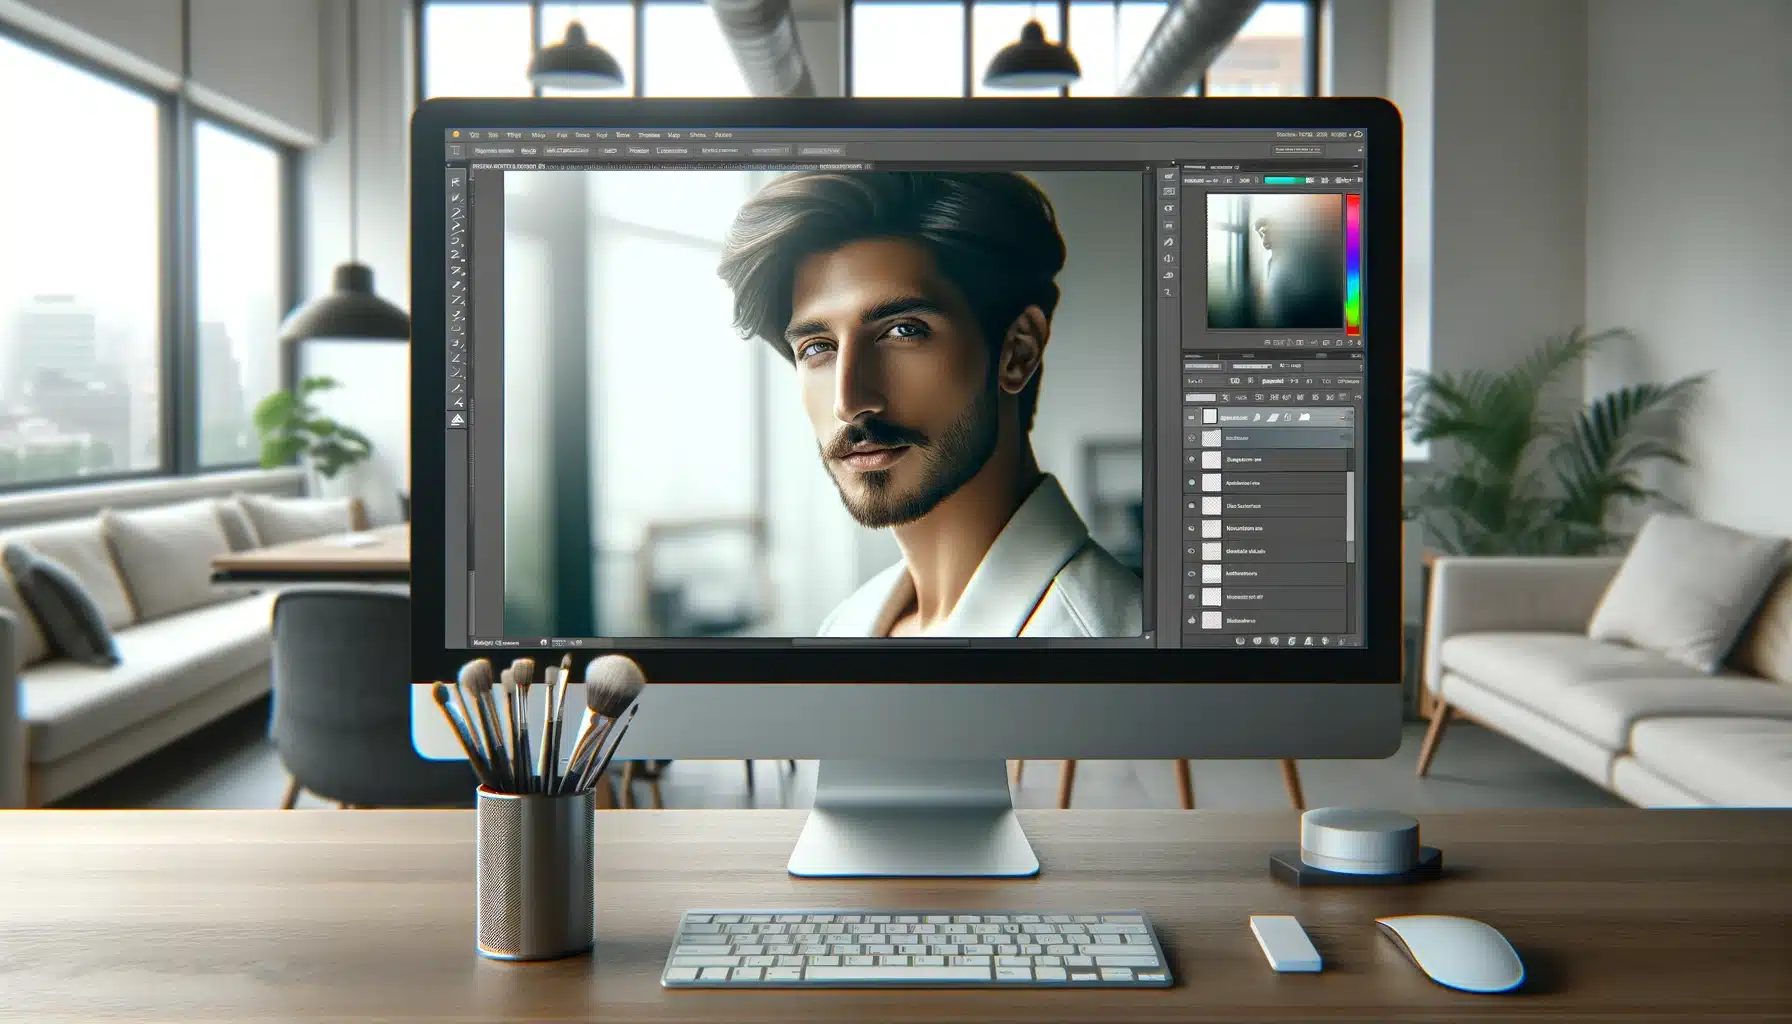 Photoshop interface showing an image of a man with a blurred background